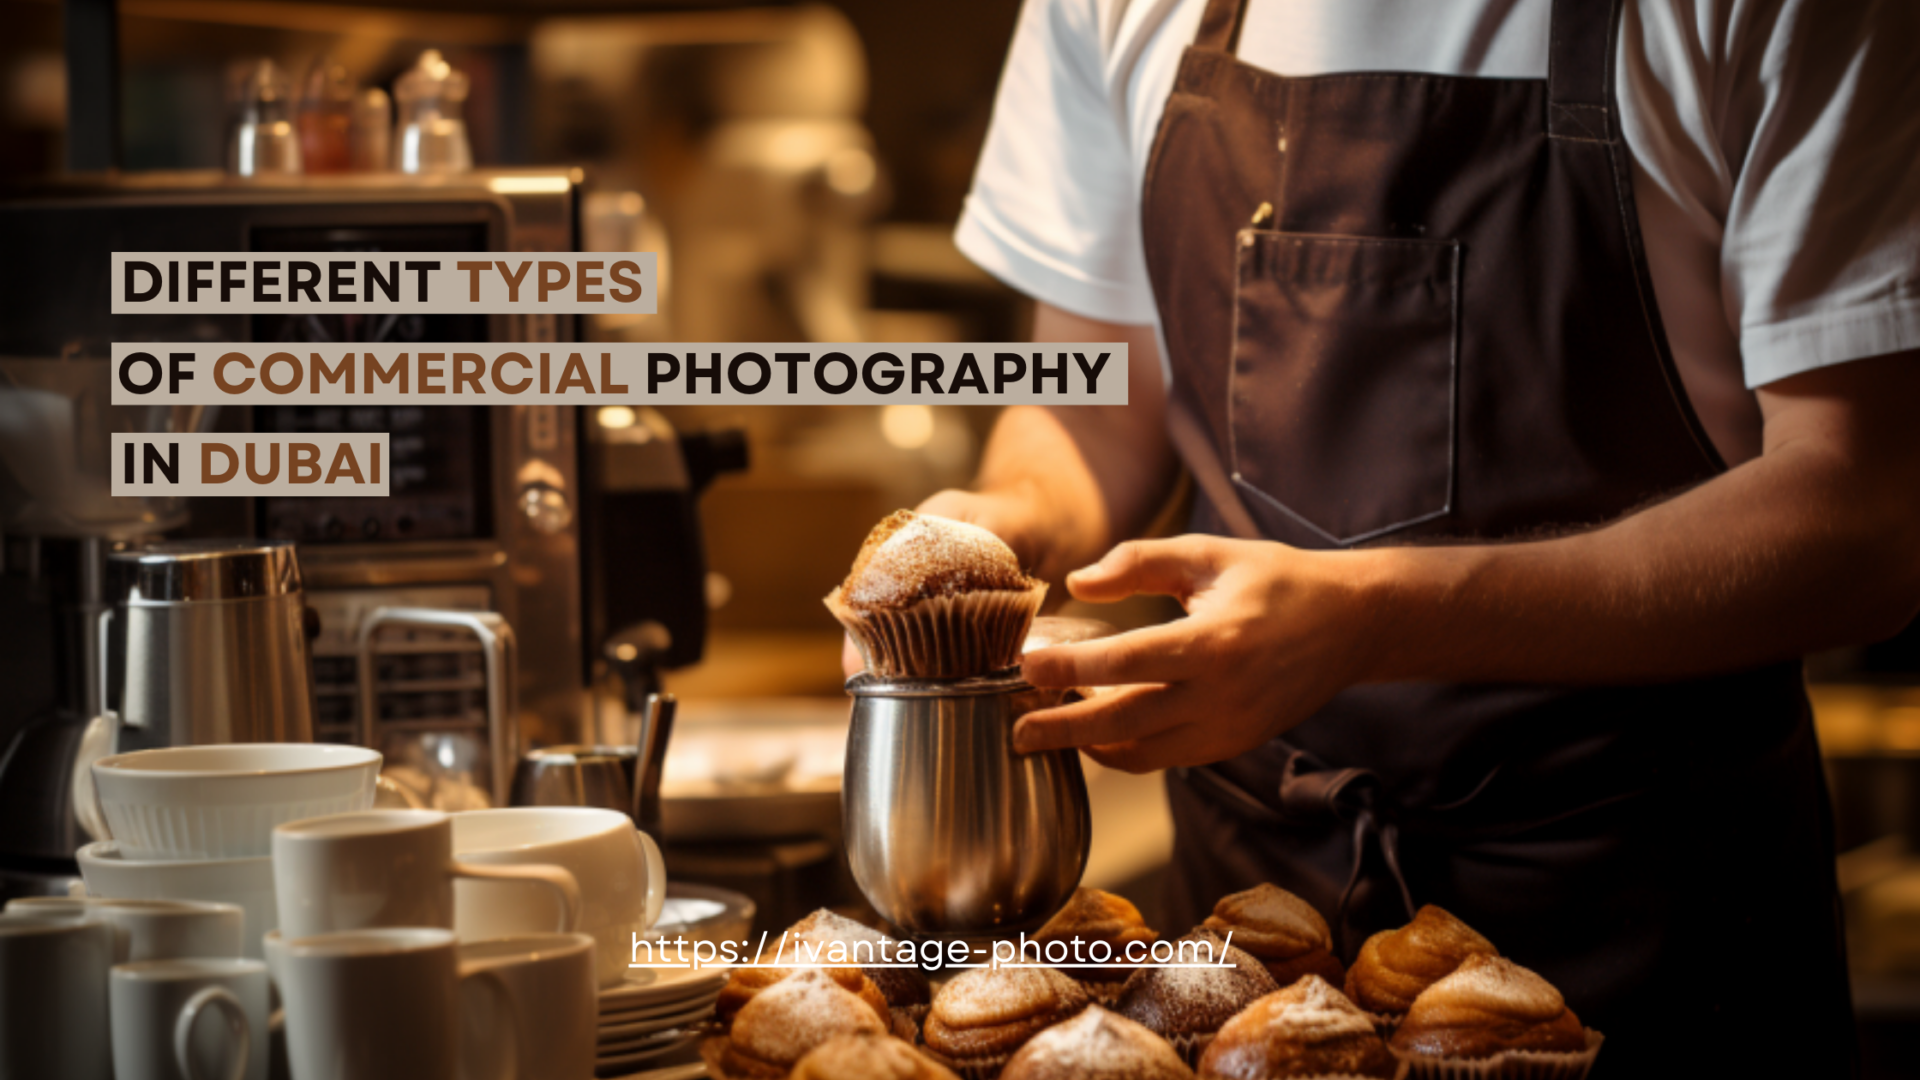 Pastry chef with freshly baked muffins on a cafÃ© table - Commercial Photography in Dubai.